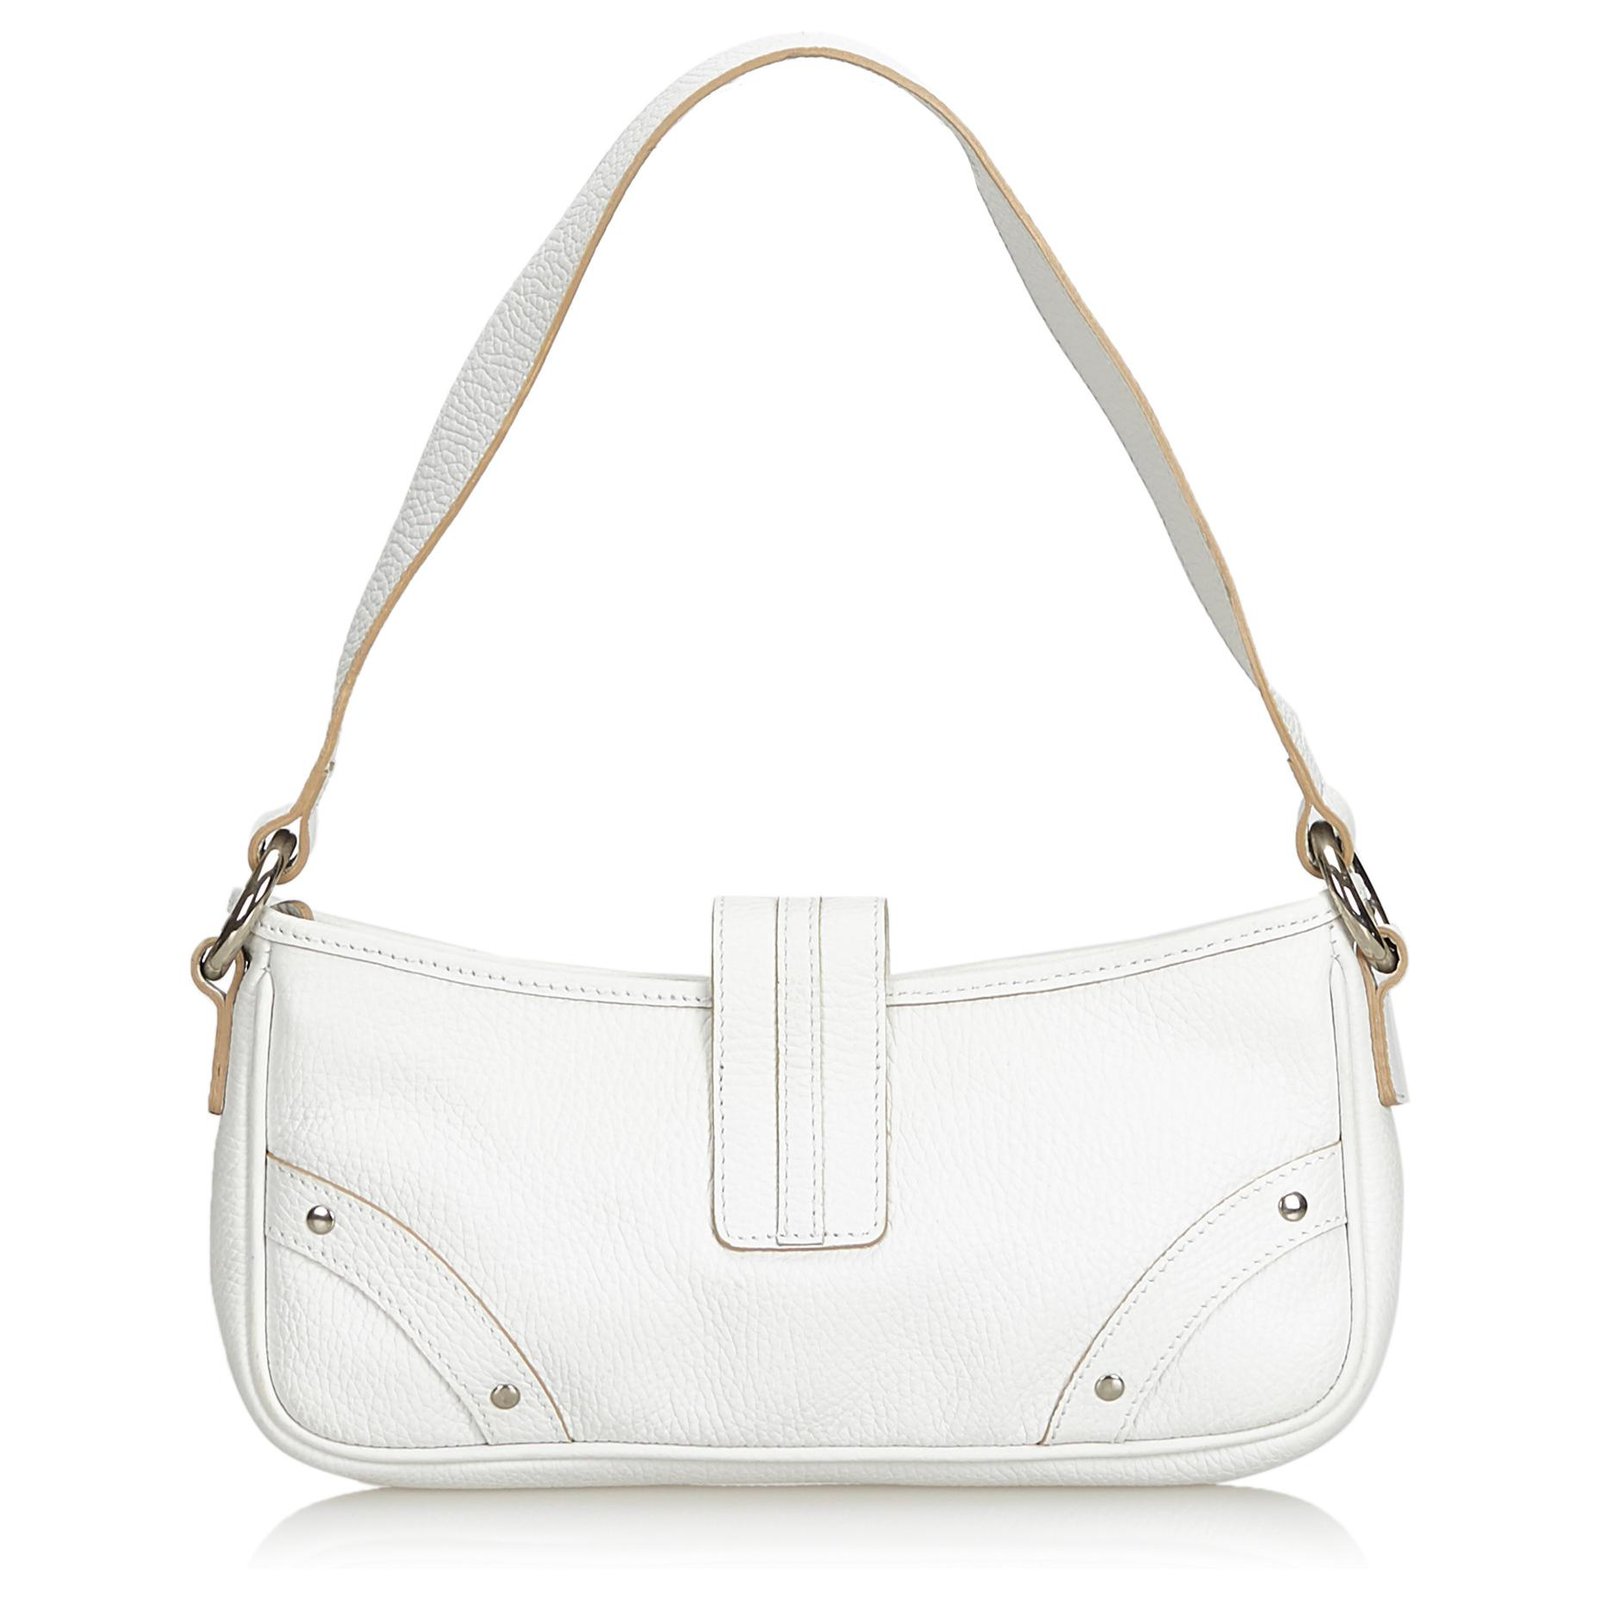 burberry white leather bag